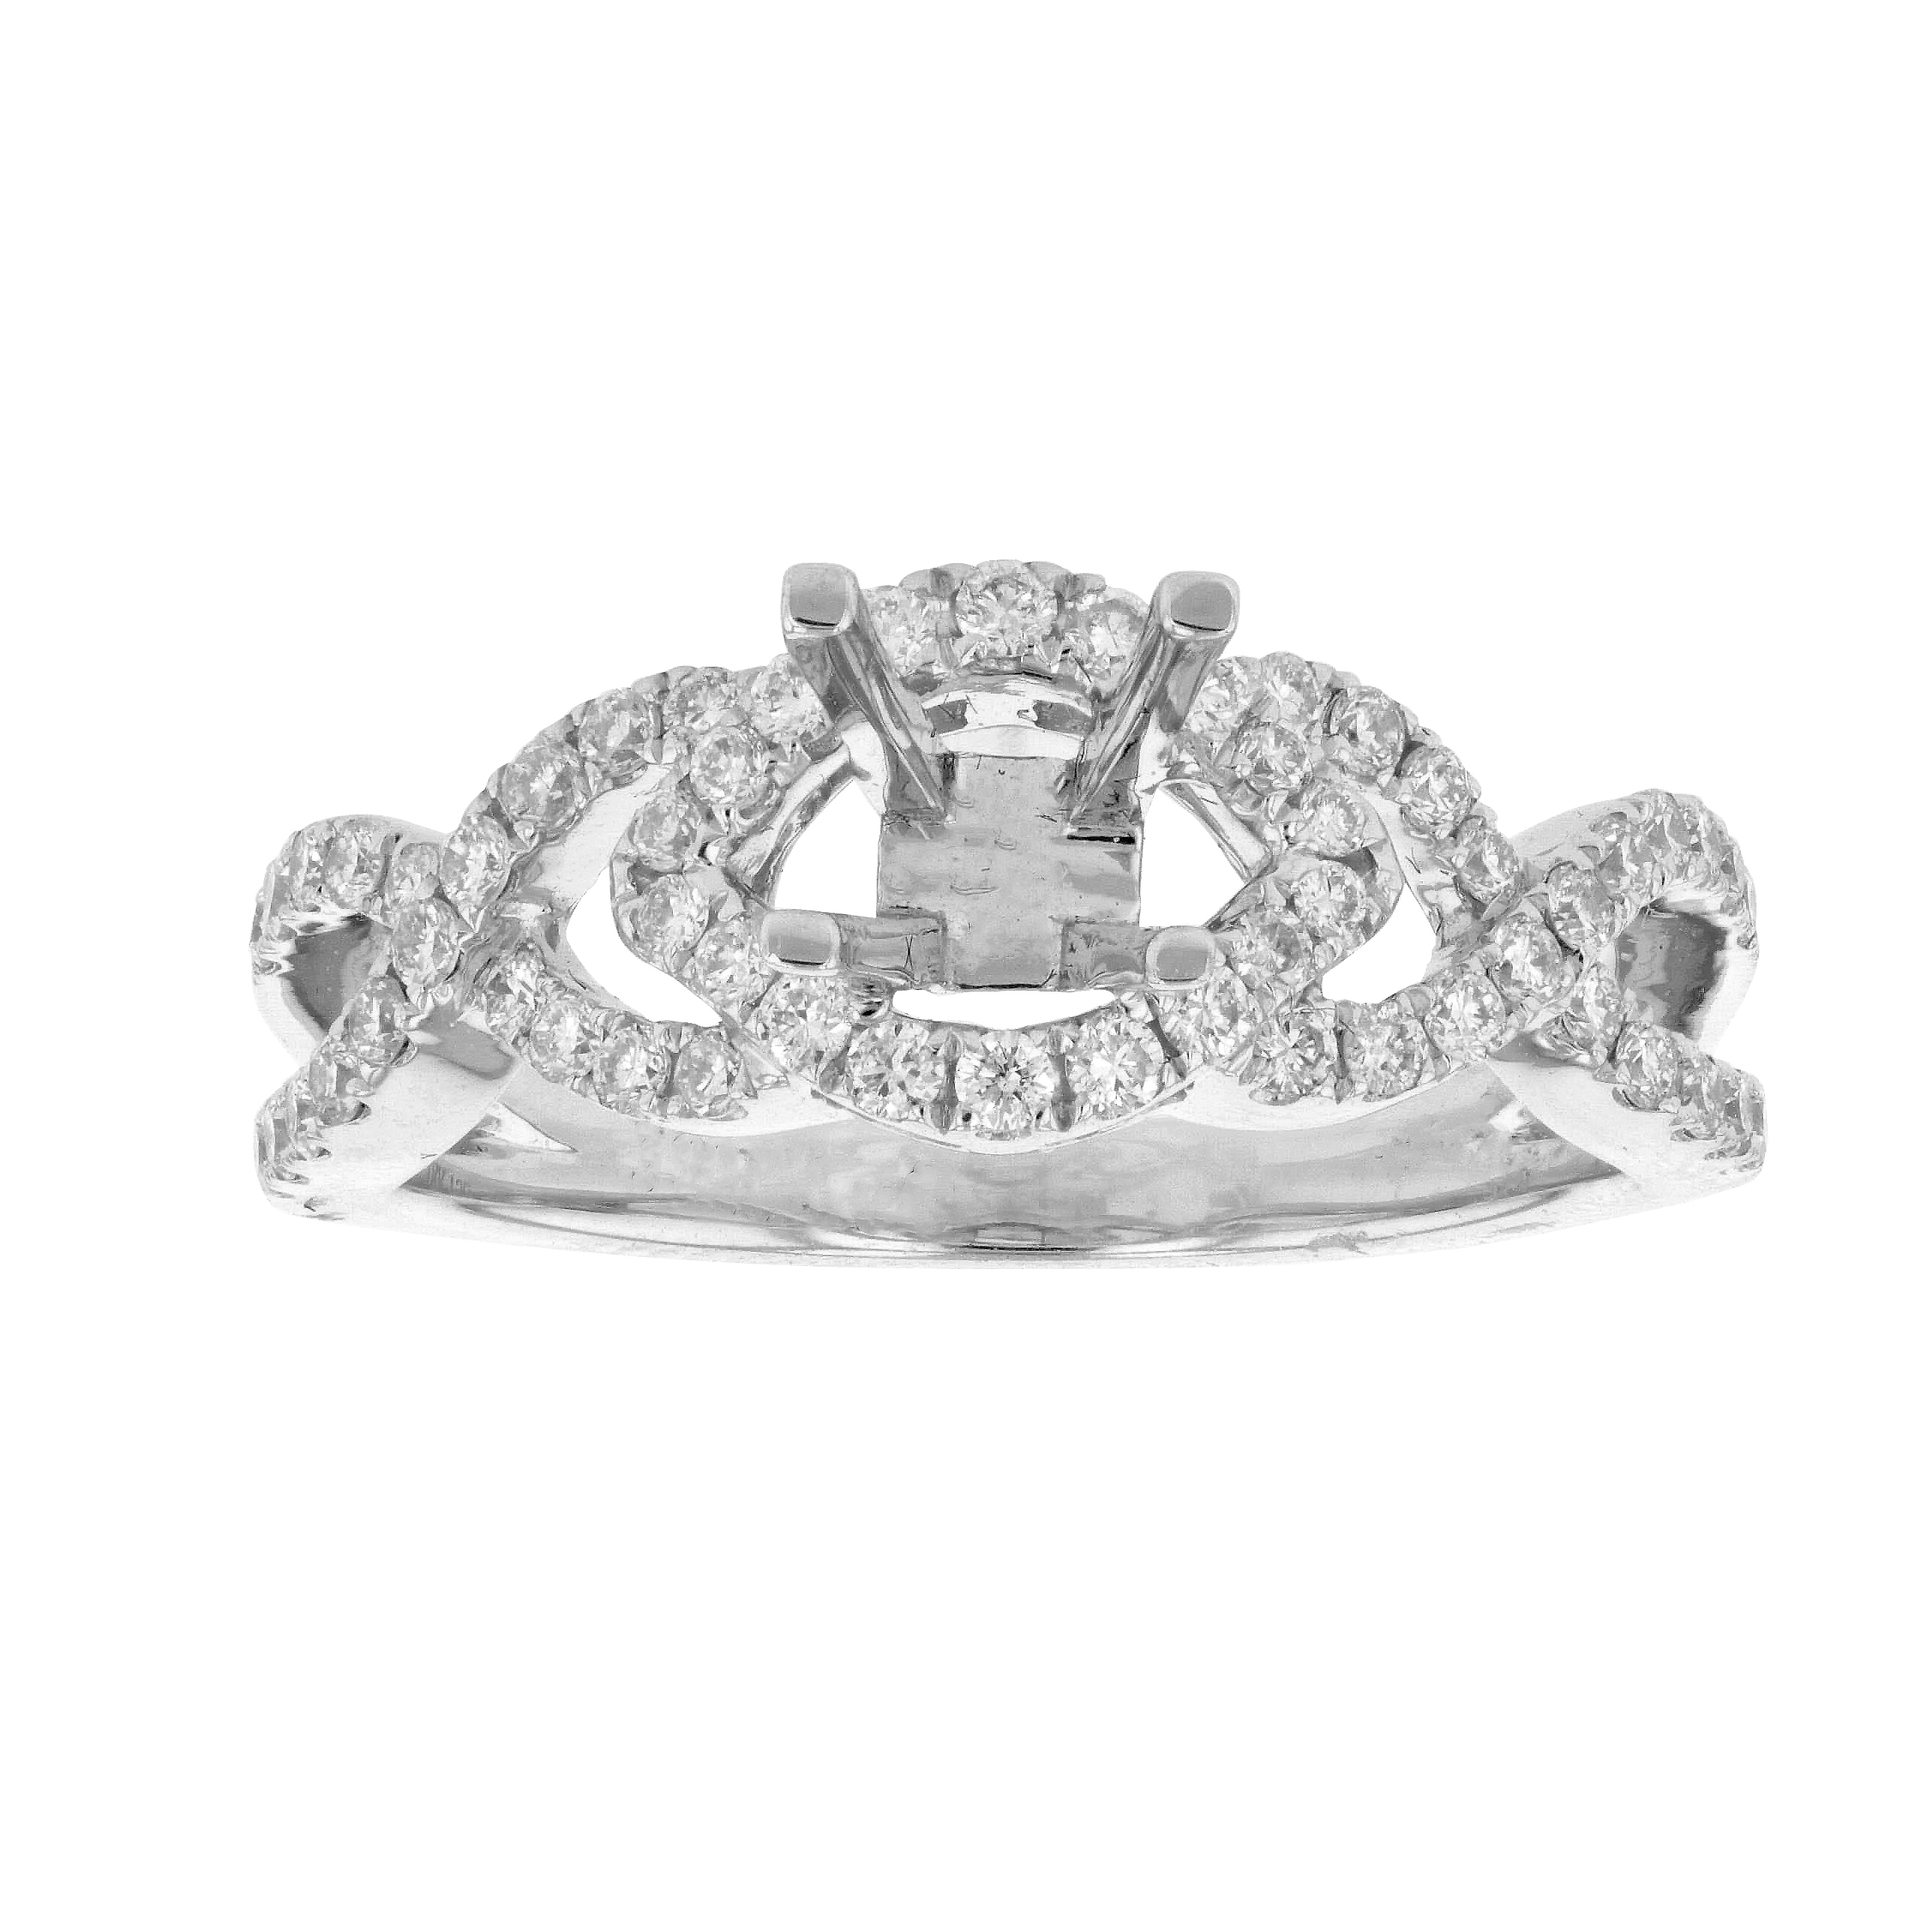 View 0.44ctw Diamond Semi Mount Engagement Ring in 18k White Gold